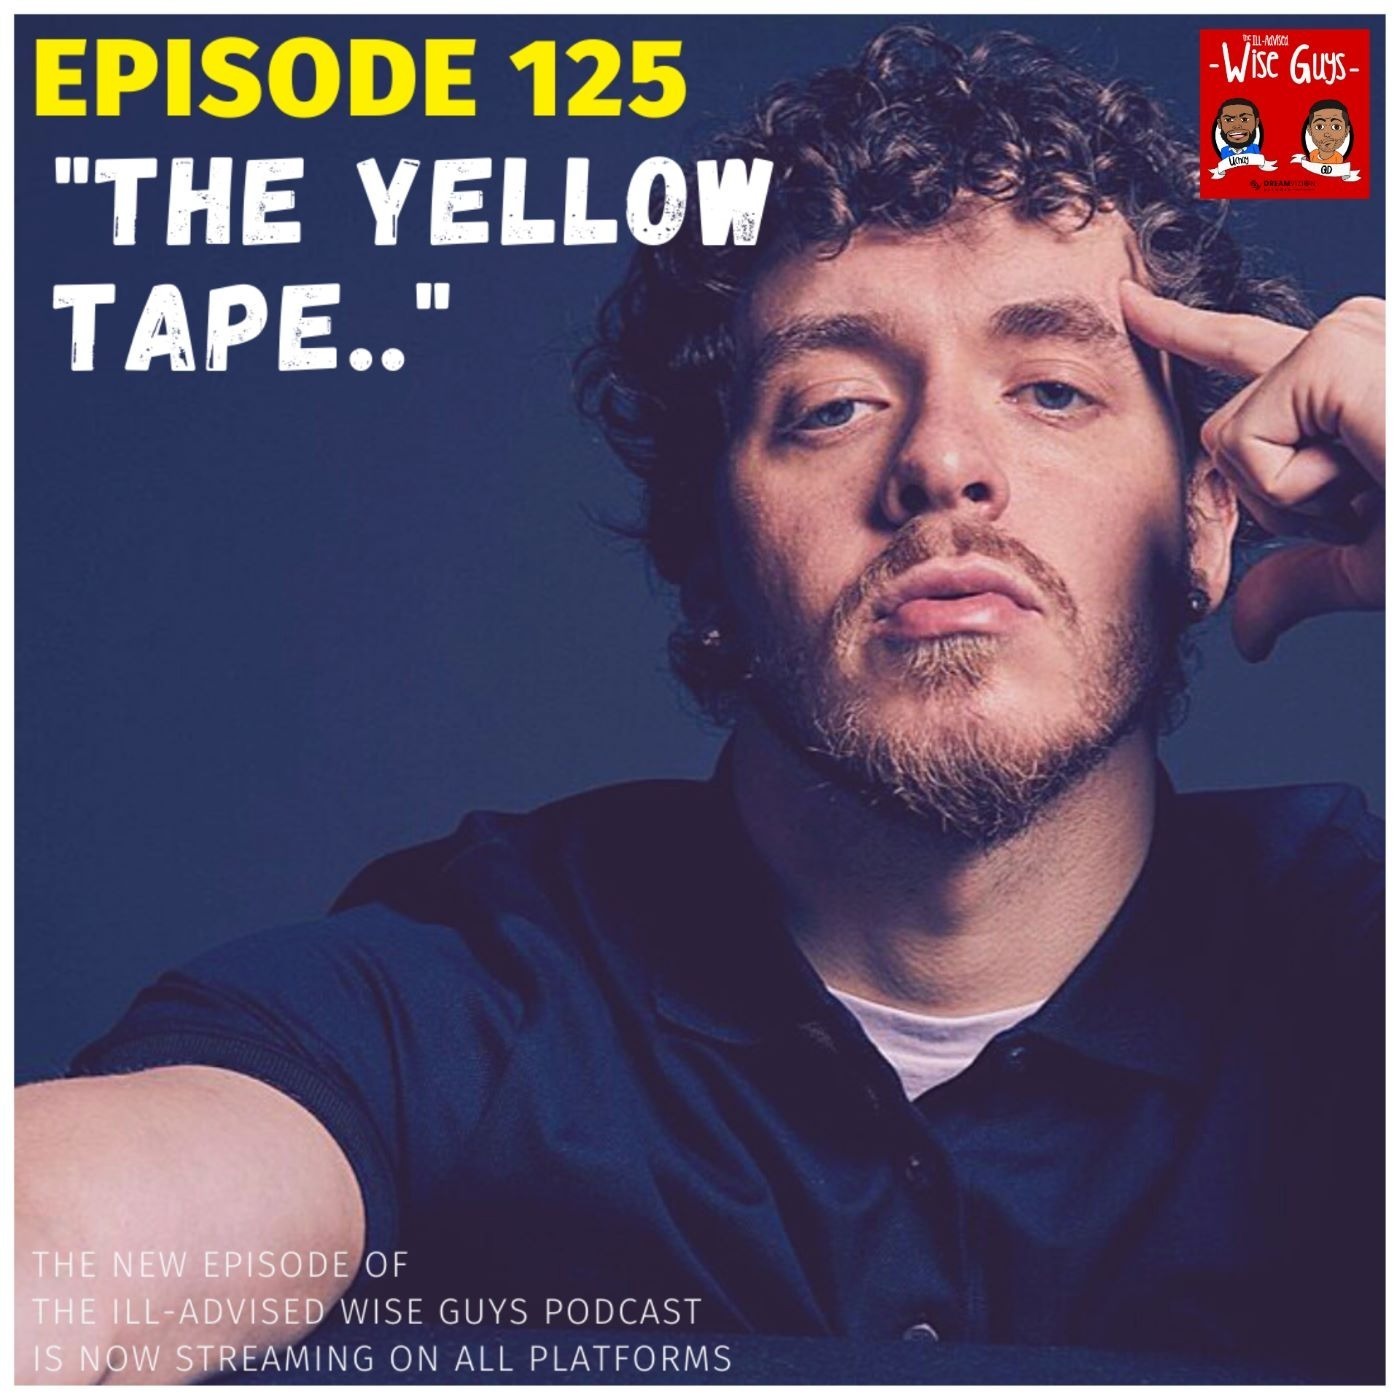 Episode 125 - "The Yellow Tape..."